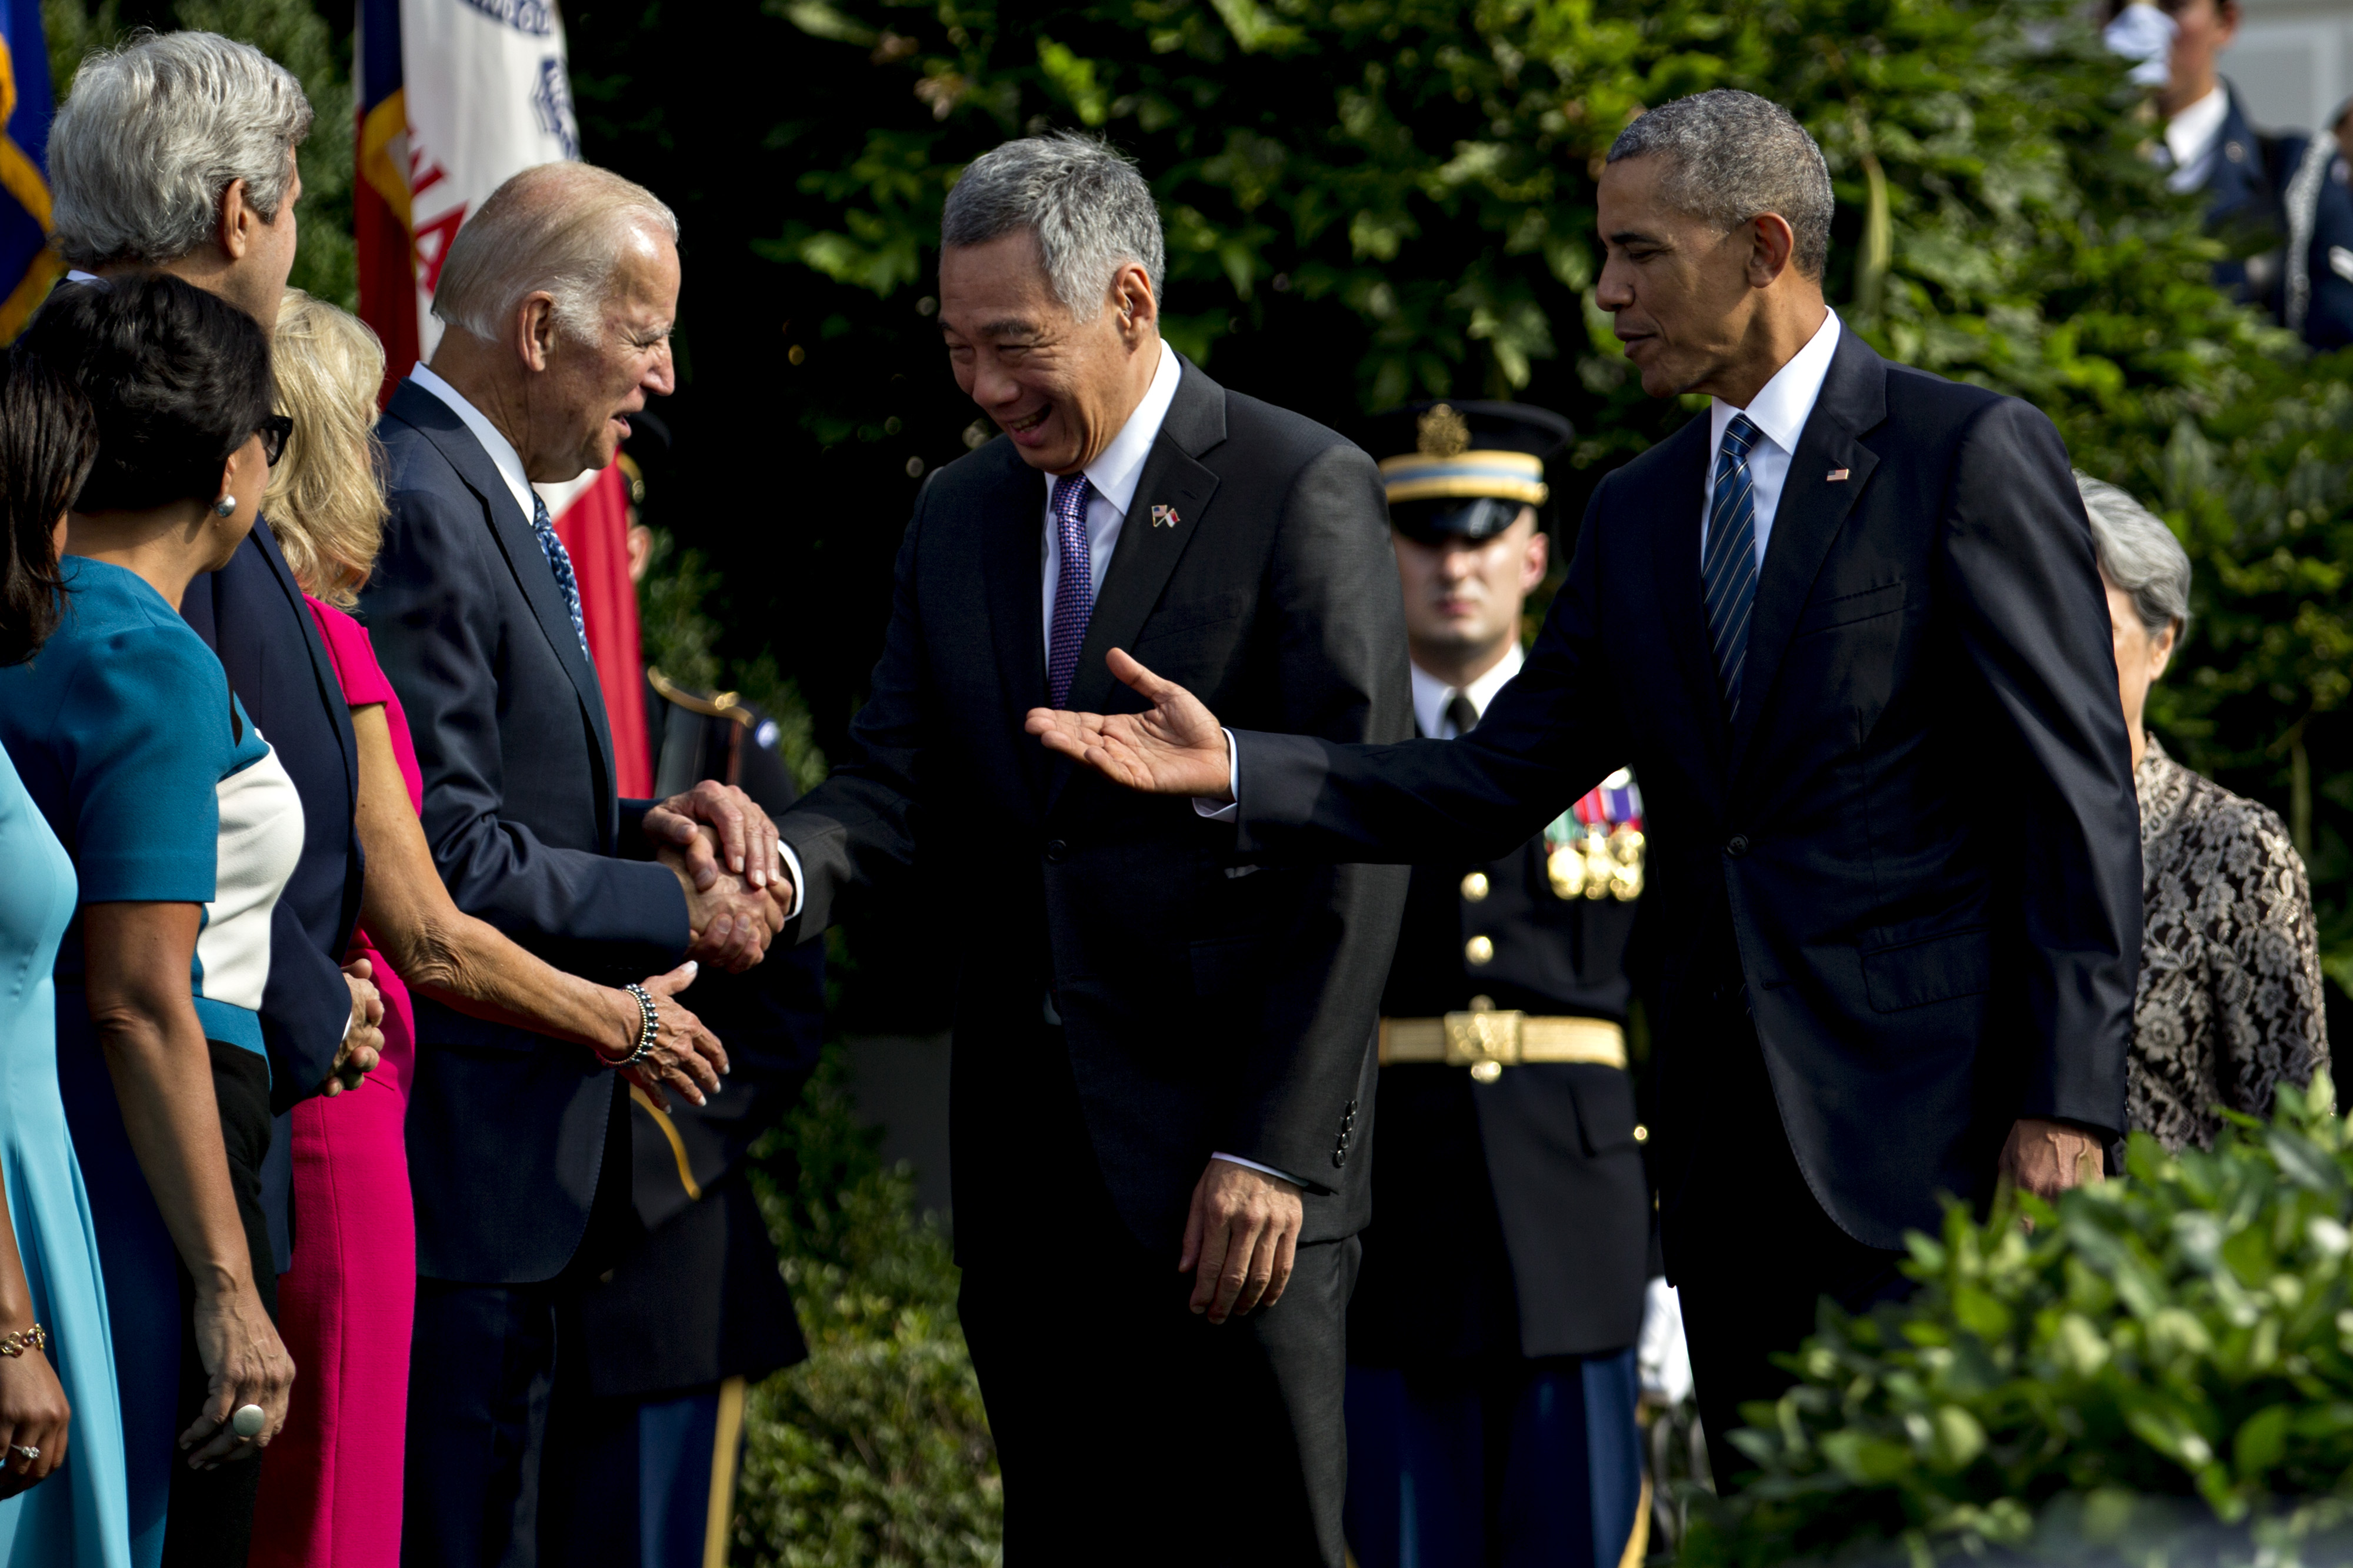 Lee Hsien Loong, Singapore's prime minster, center, greets U.S. Vice President Joseph "Joe" Biden with U.S. President Barack Obama, right, during an official arrival ceremony on the South Lawn of the White House in Washington, D.C., U.S., on Tuesday, Aug. 2, 2016. The occasion marks first official visit by a Singapore prime minister since 1985. Photographer: Andrew Harrer/Bloomberg via Getty Images